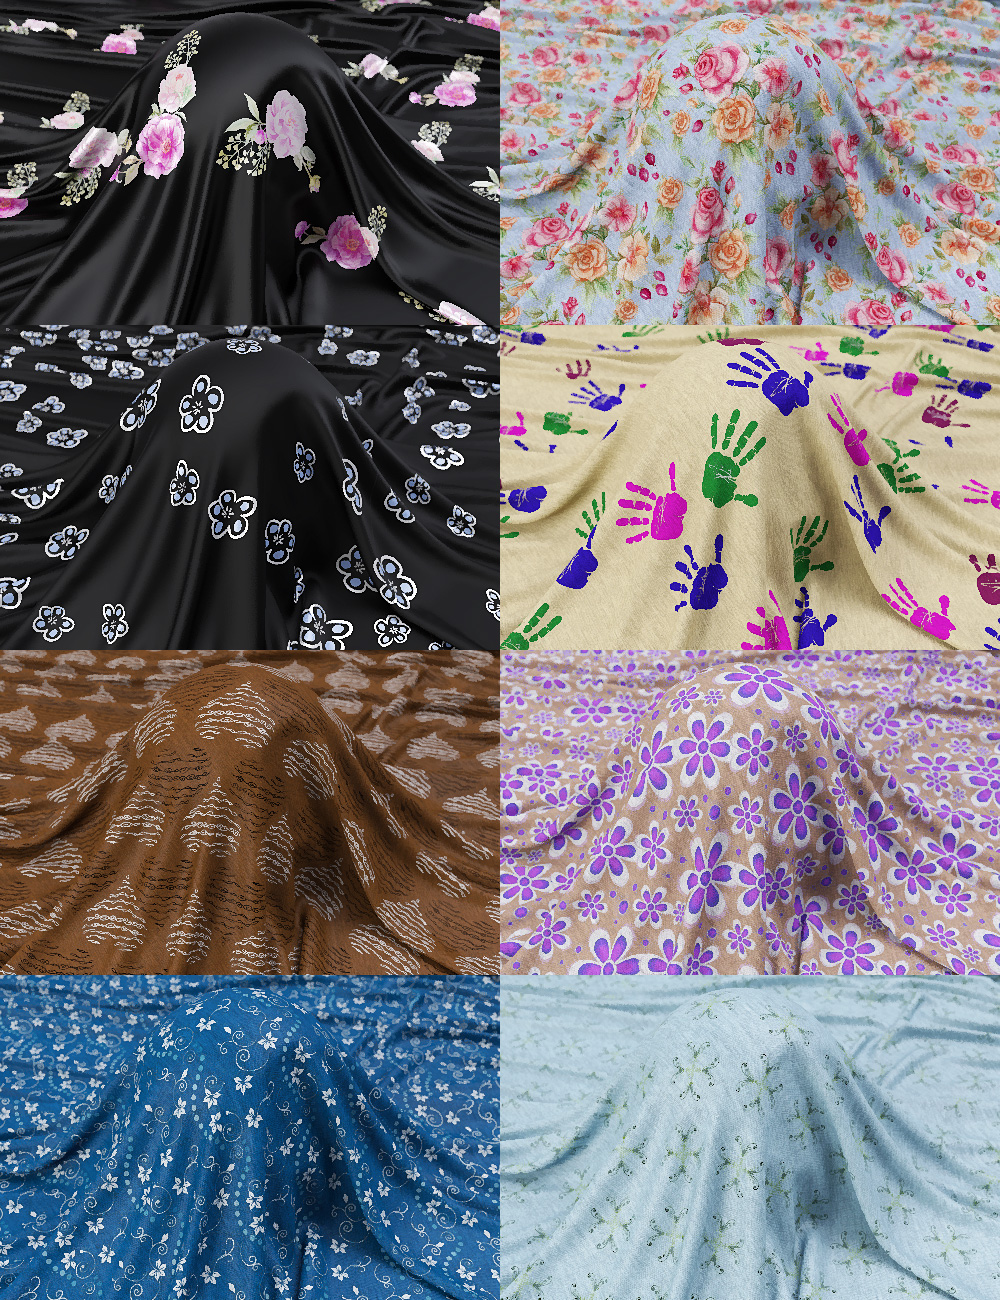 Paisley and Patterns Iray Shaders by: JGreenlees, 3D Models by Daz 3D